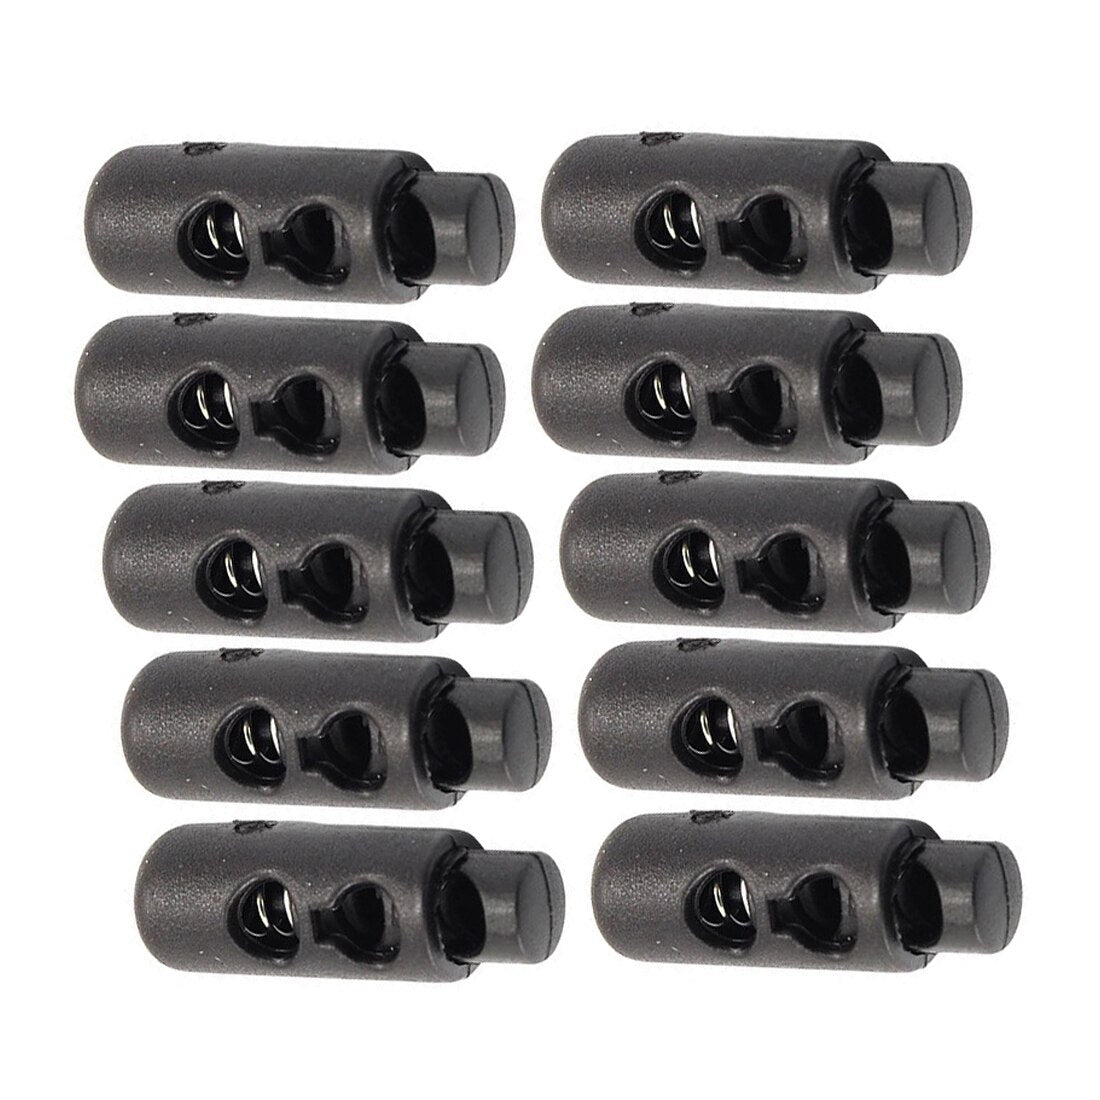 Hot Style10 x Plastic Barrel Cylinder Stoppers Toggle Cord Locks Black - ebowsos